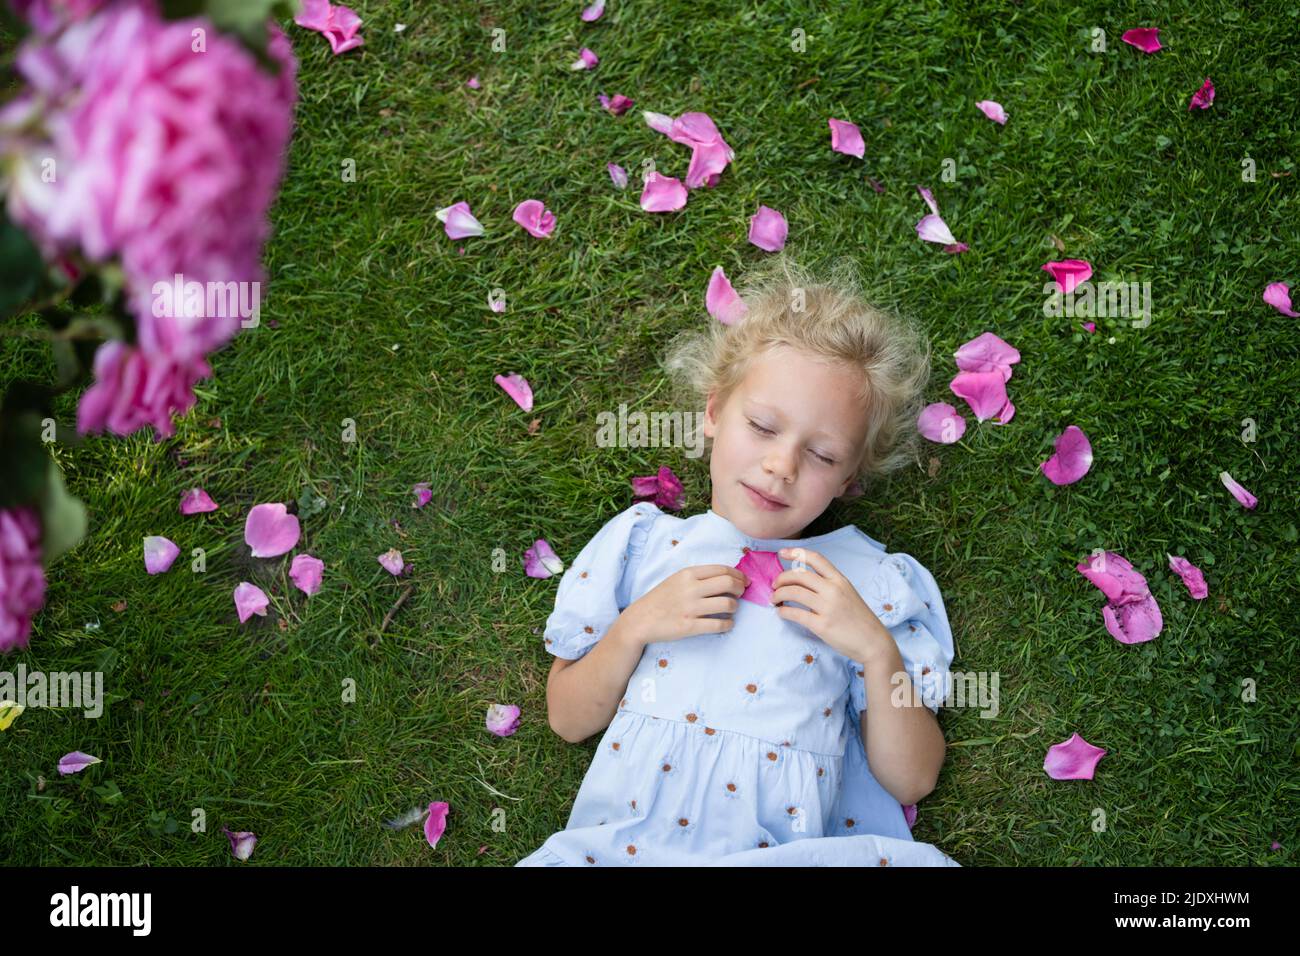 Girl with eyes closed holding a rose petal resting by lying on grass Stock Photo